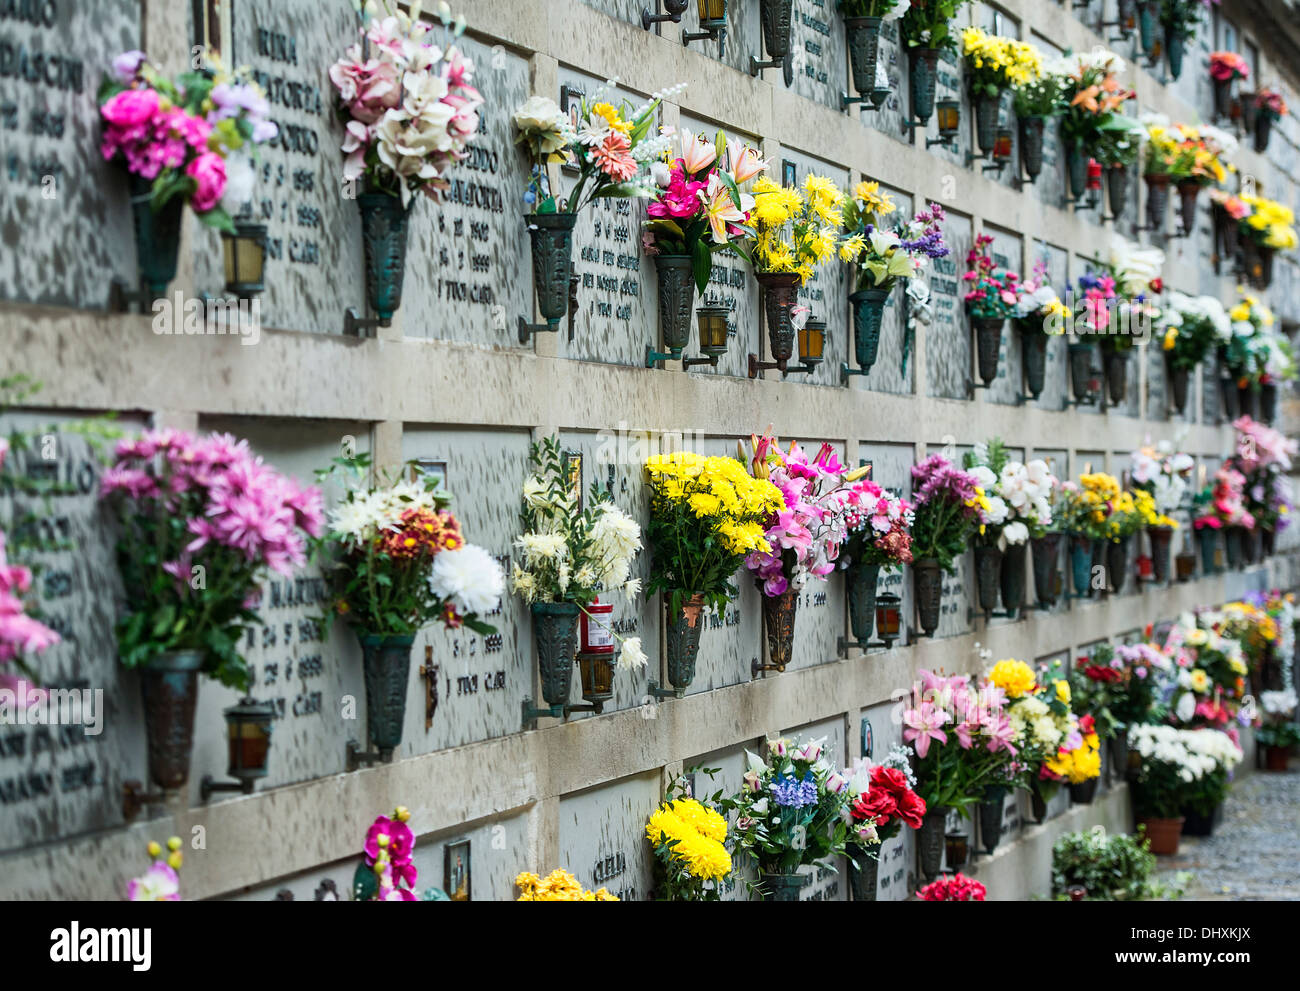 Fresh flowers adorn the burial vaults of the village cemetery, Porto Venere, Italy Stock Photo